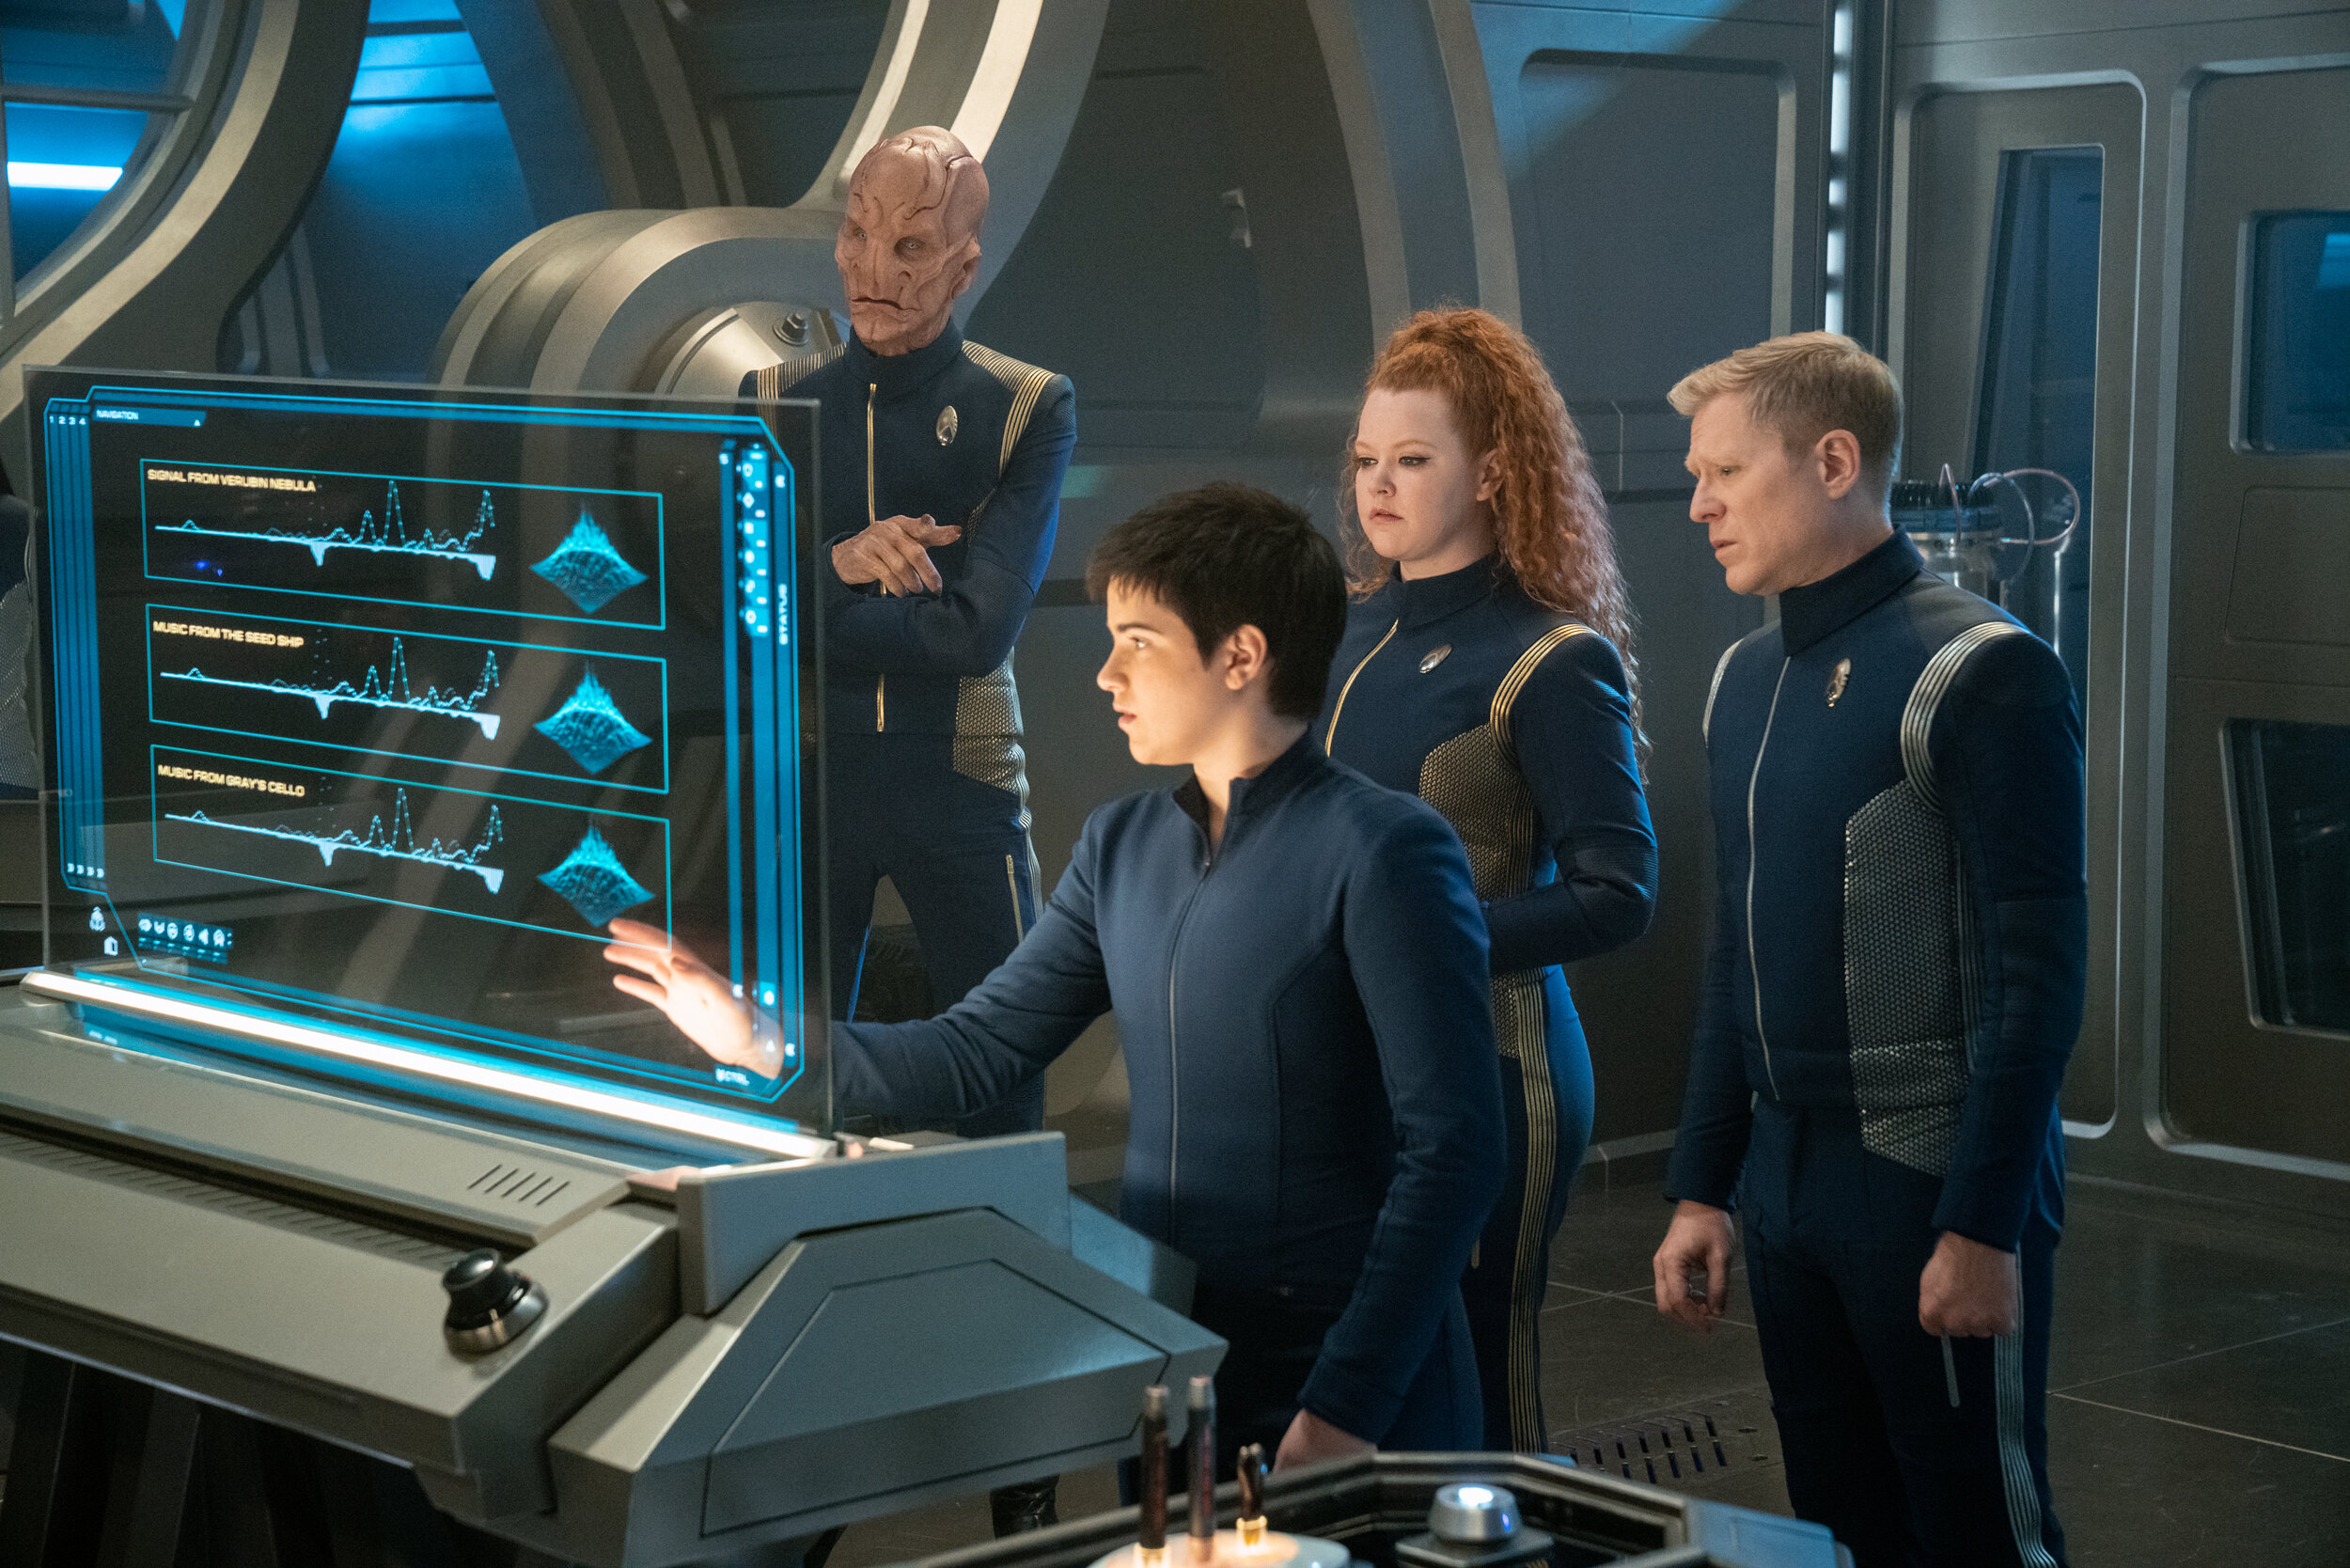   "Terra Firma, Part 1" -- Ep#309 -- Pictured (L-R): Doug Jones as Capt. Saru, Blu del Barrio as Adira, Mary Wiseman as Ensign Sylvia Tilly and Anthony Rapp as Lt. Commander Paul Stamets of the CBS All Access series STAR TREK: DISCOVERY. Photo Cr: Mi